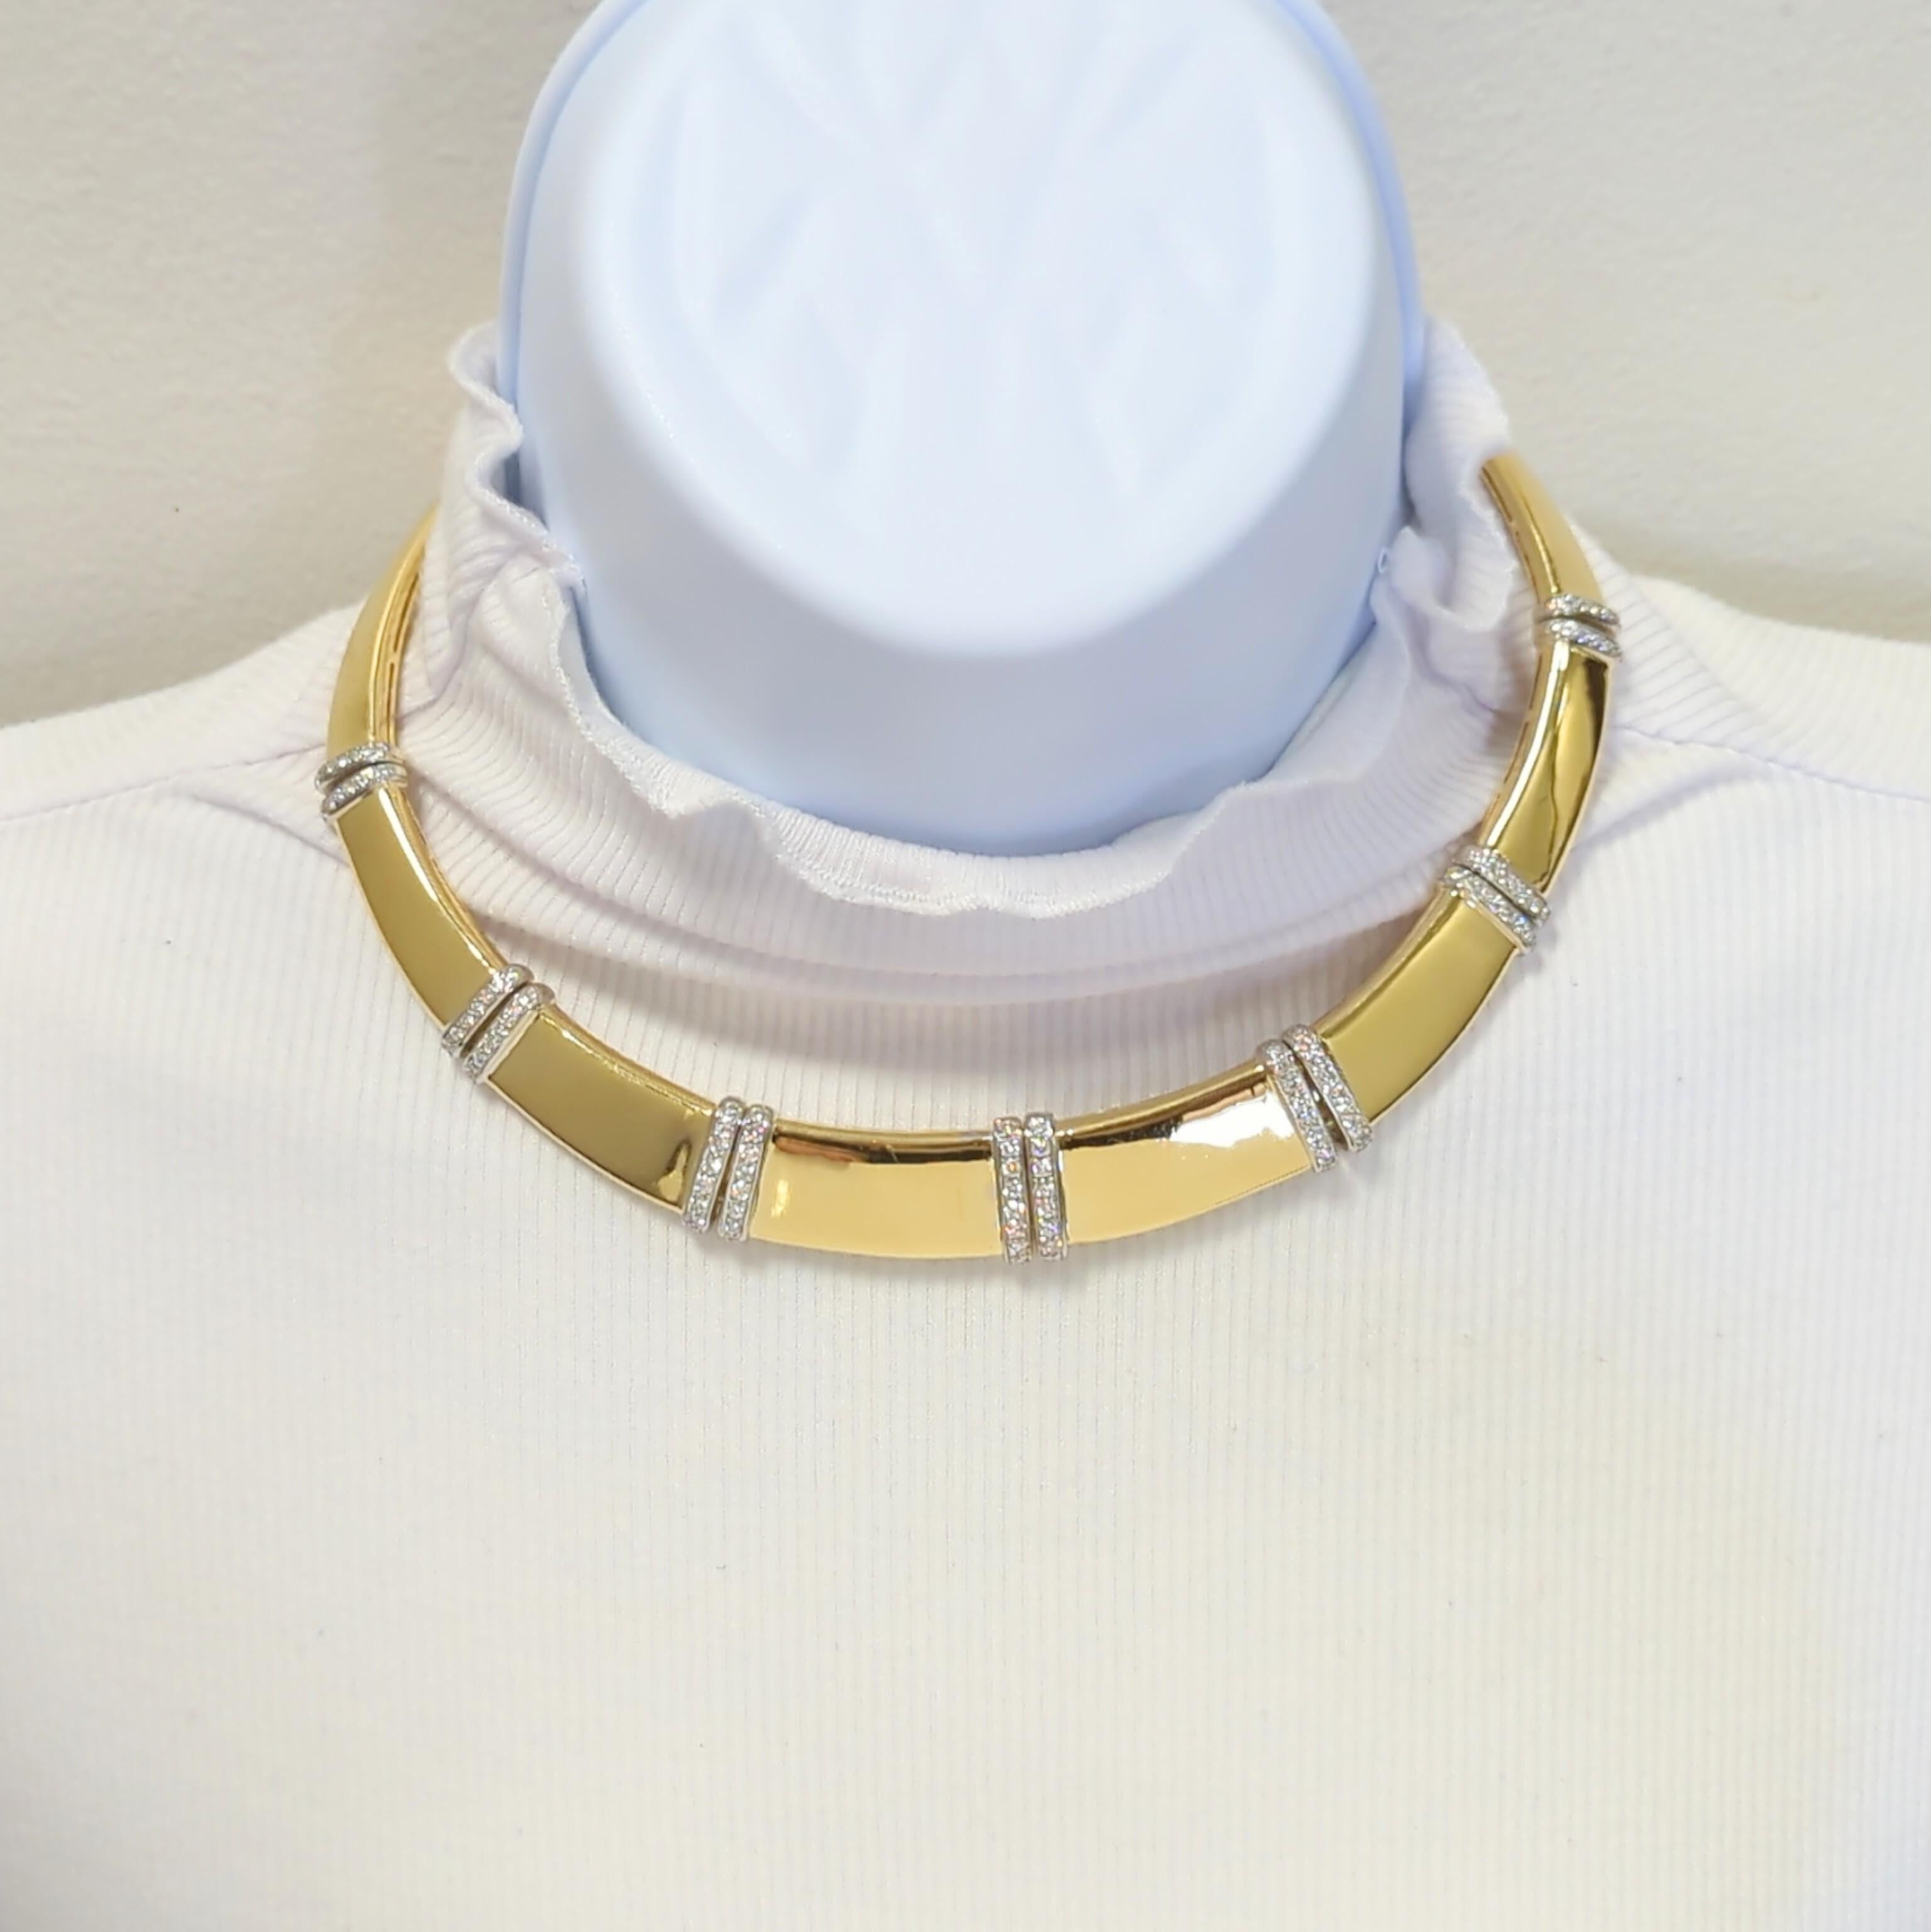 Beautiful gold necklace with 2.54 ct. of good quality, white, and bright diamond rounds.  Handmade in 18k white and yellow gold.  Fits a 15